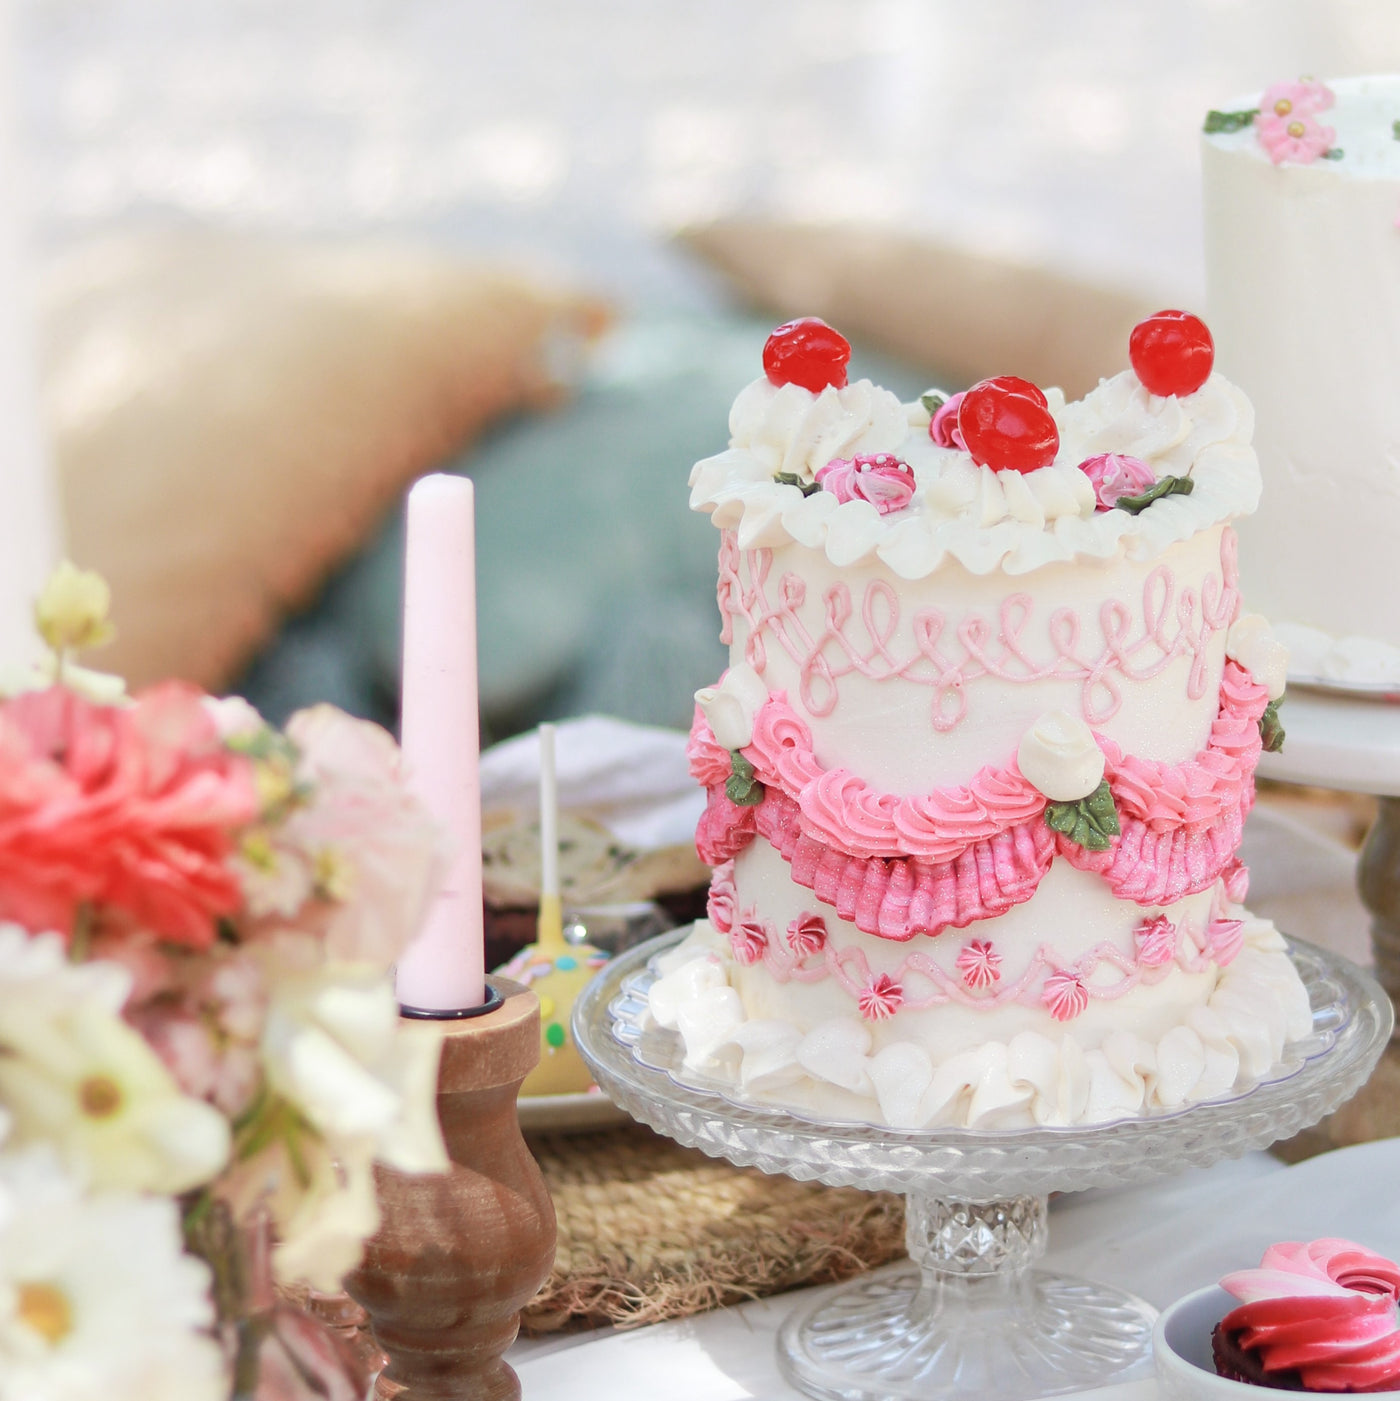 The leticia, mother's day gift, best mother's day cake, best mother's day brunch ideas, trending mother's day, best vegas mother's day, Las vegas locals